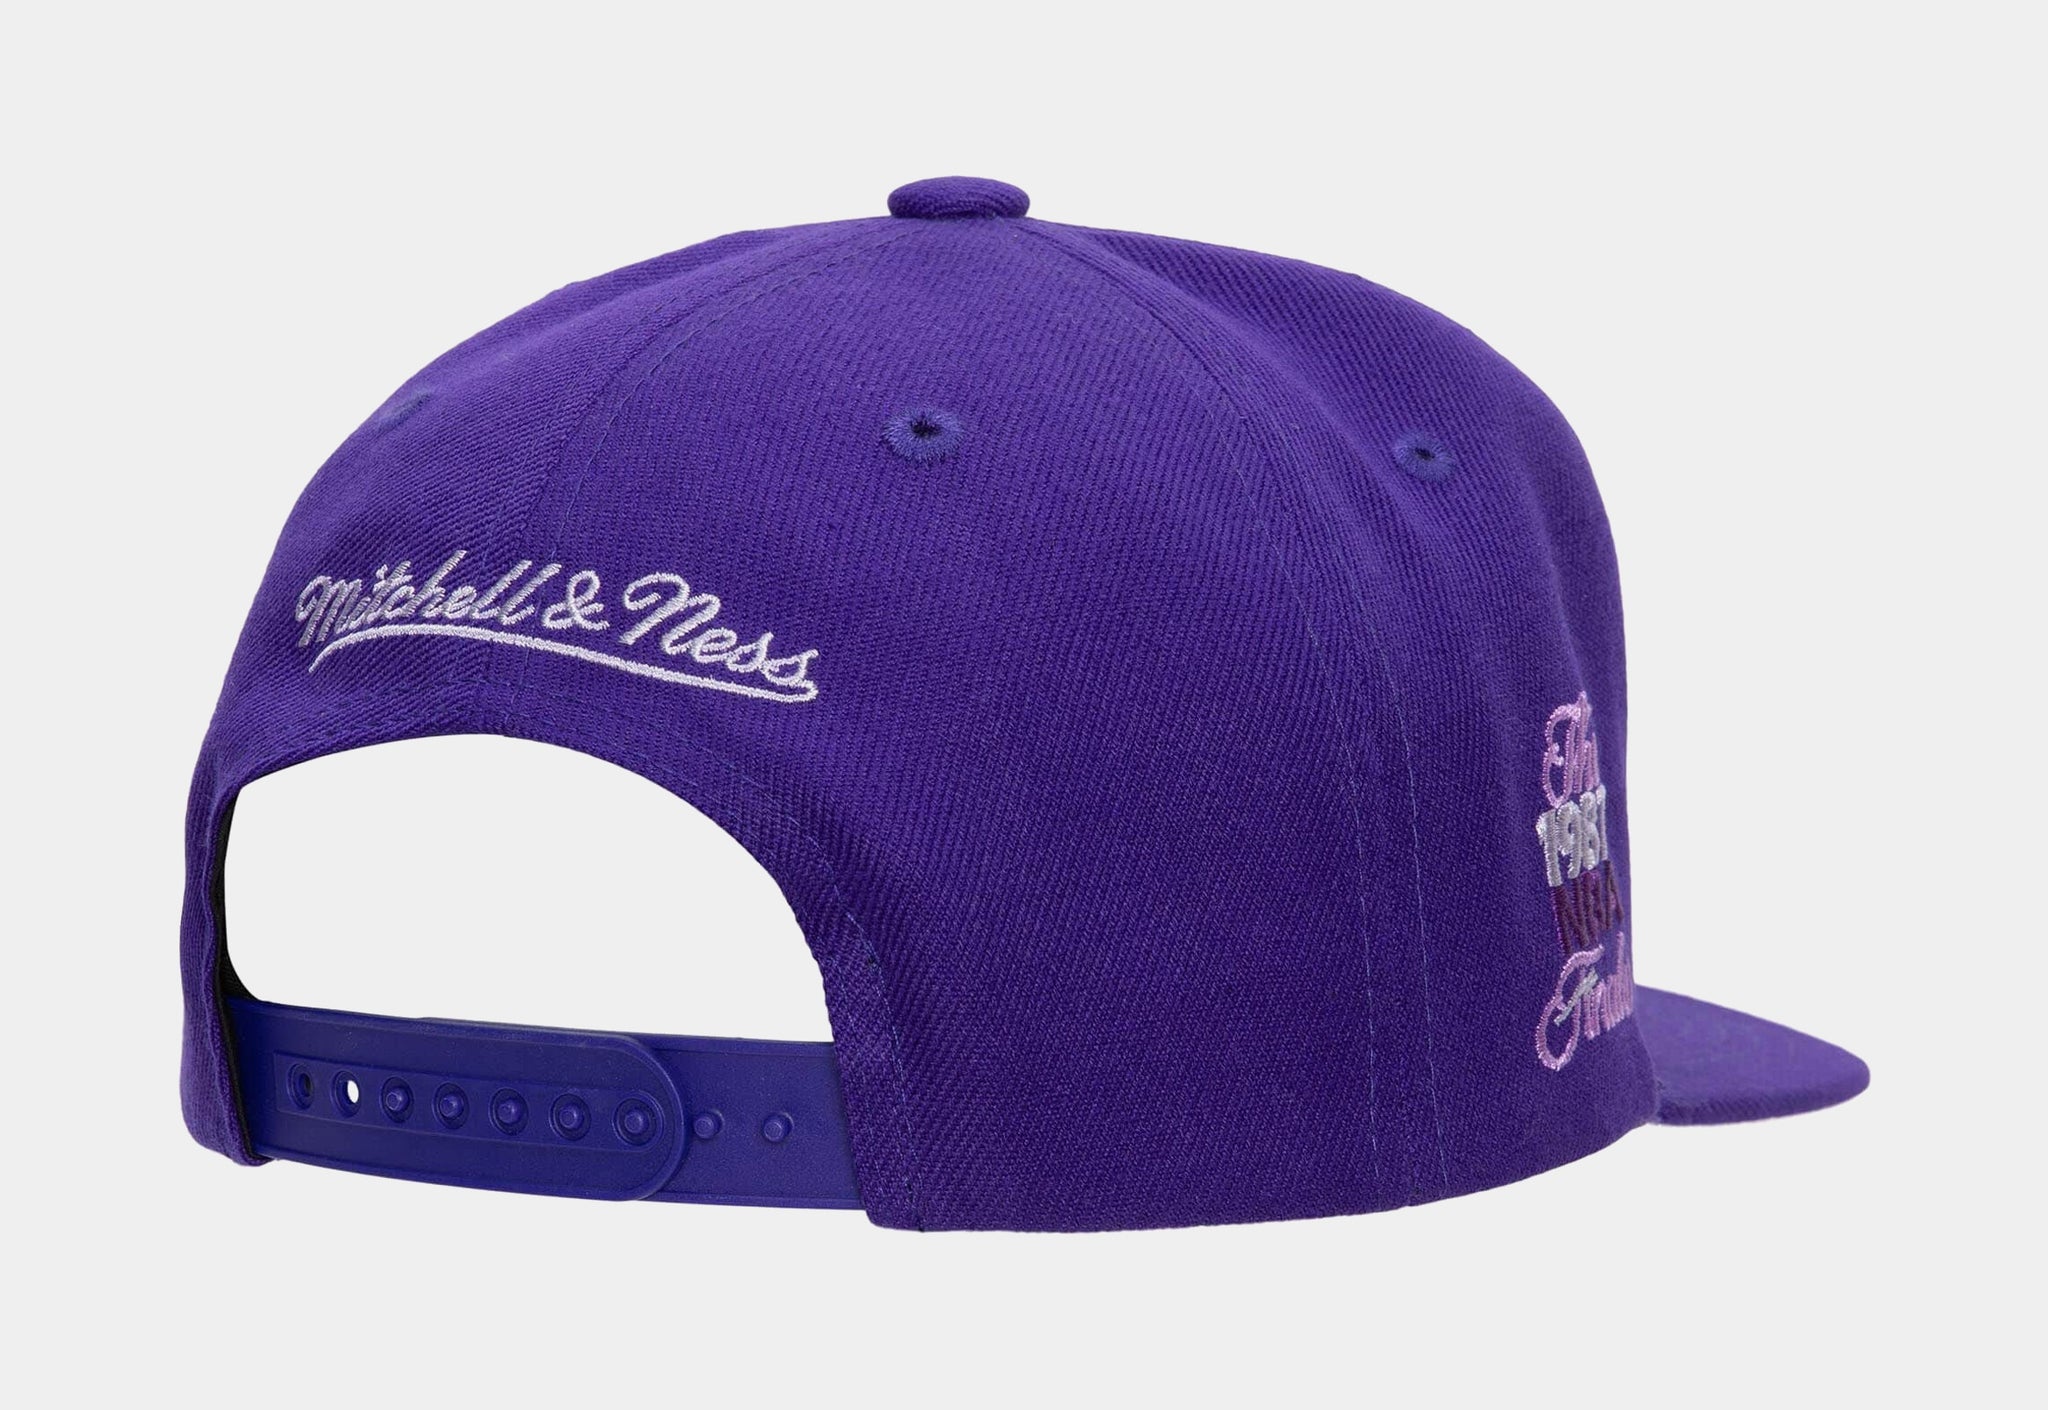 Freethrow Snap Lakers Cap by Mitchell & Ness - 31,95 €